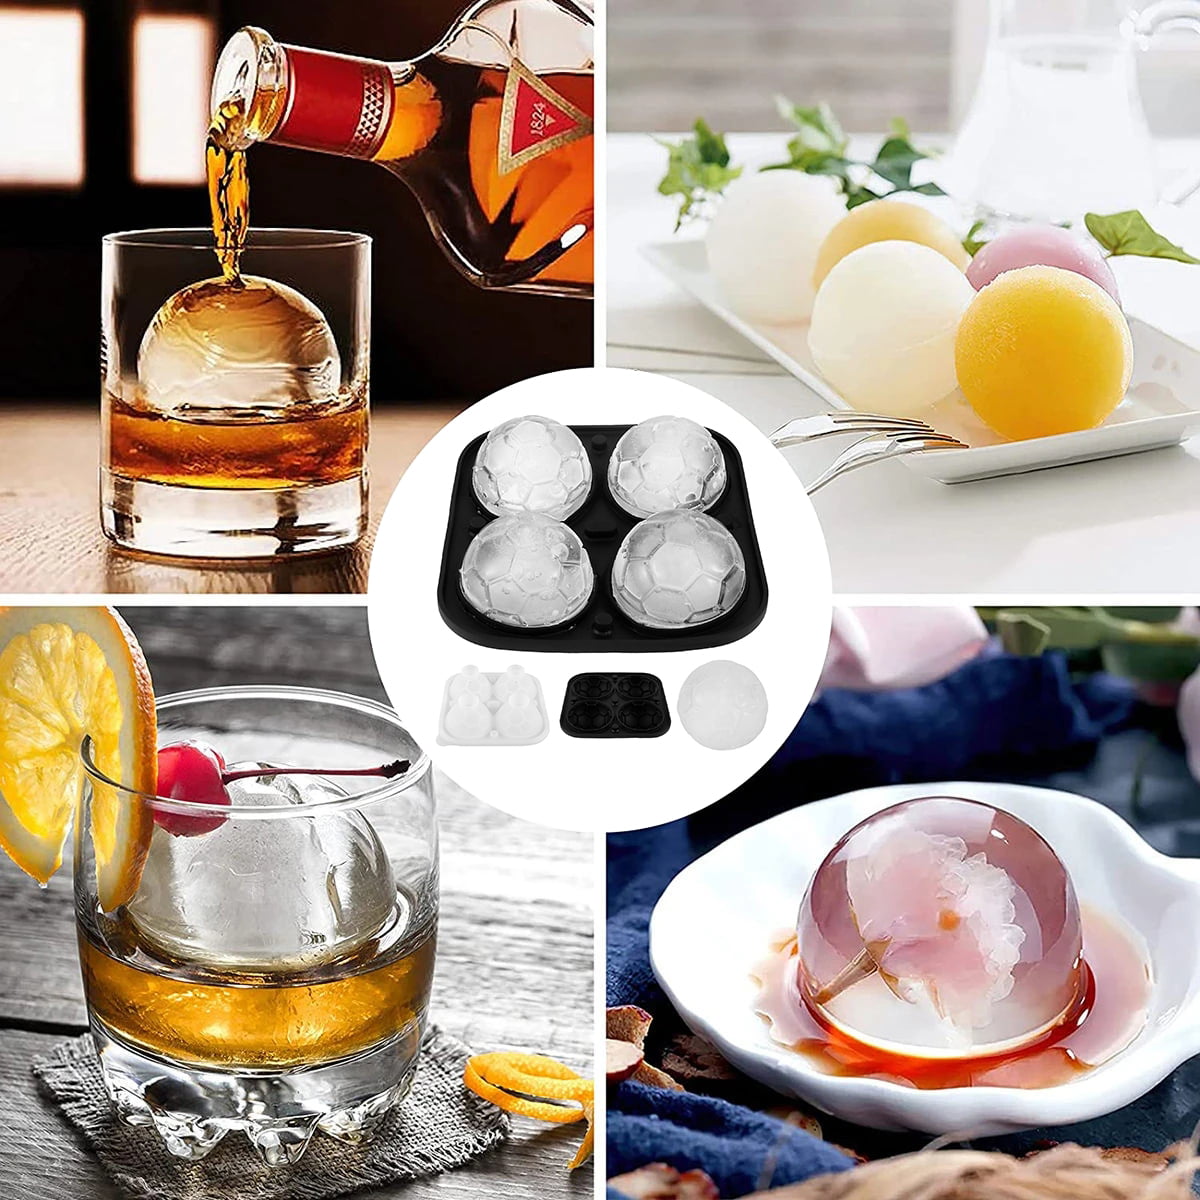 Ice Cube Trays, Adoric Life Ice Tray Silicone Set of 2 with Funnel, Sphere  Ice Ball Maker and Large Square Ice Cube Molds for Whiskey, Reusable and  BPA Free 